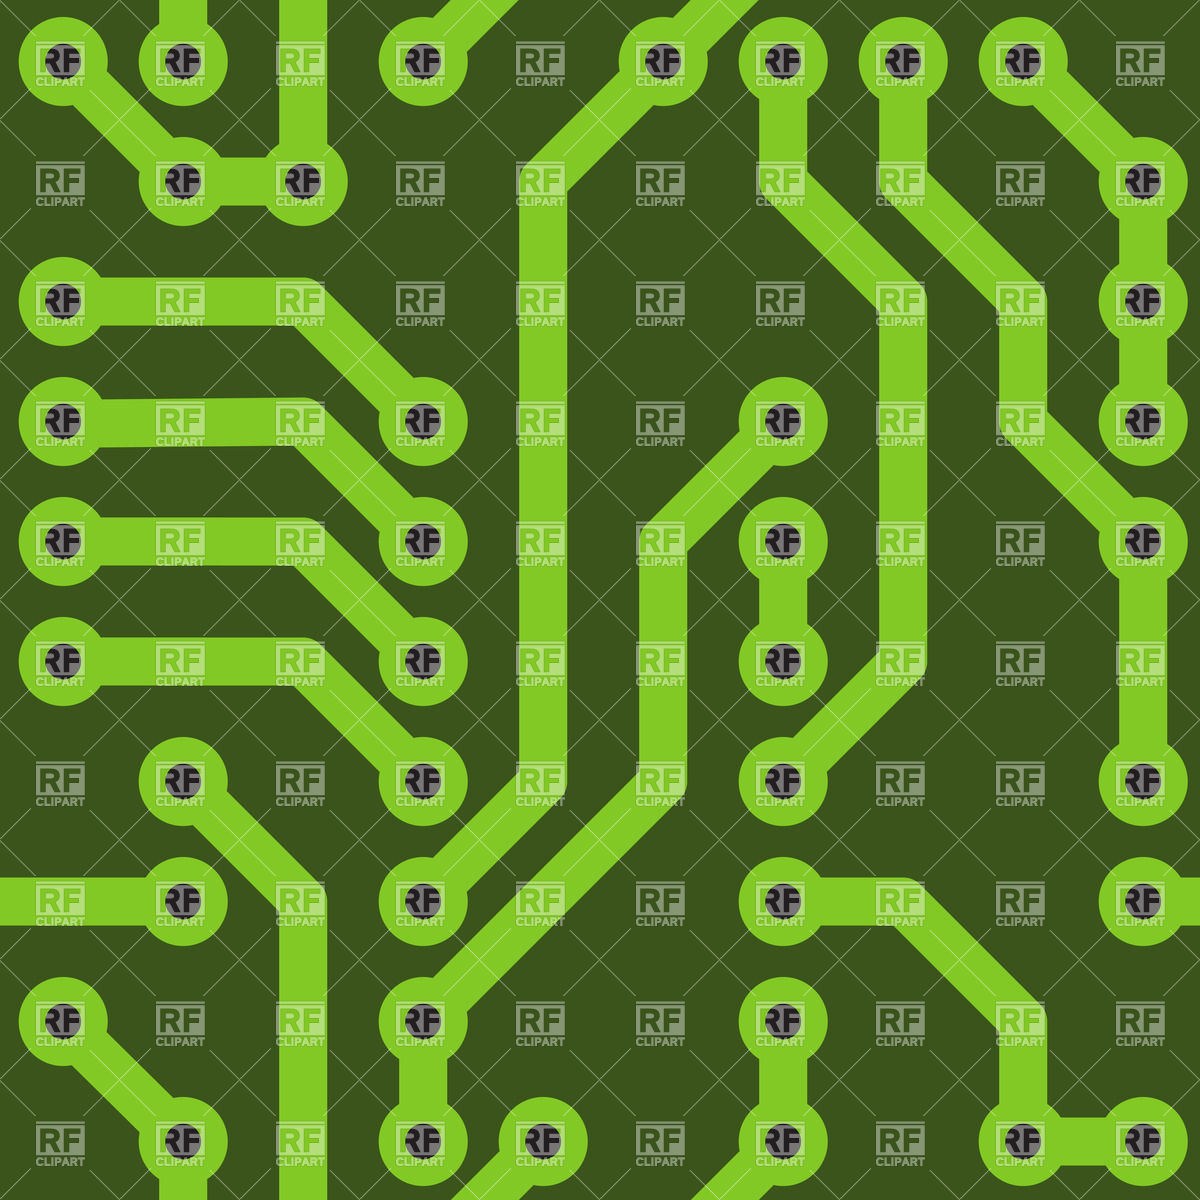 Circuit Board   Seamless Pattern 33811 Download Royalty Free Vector    